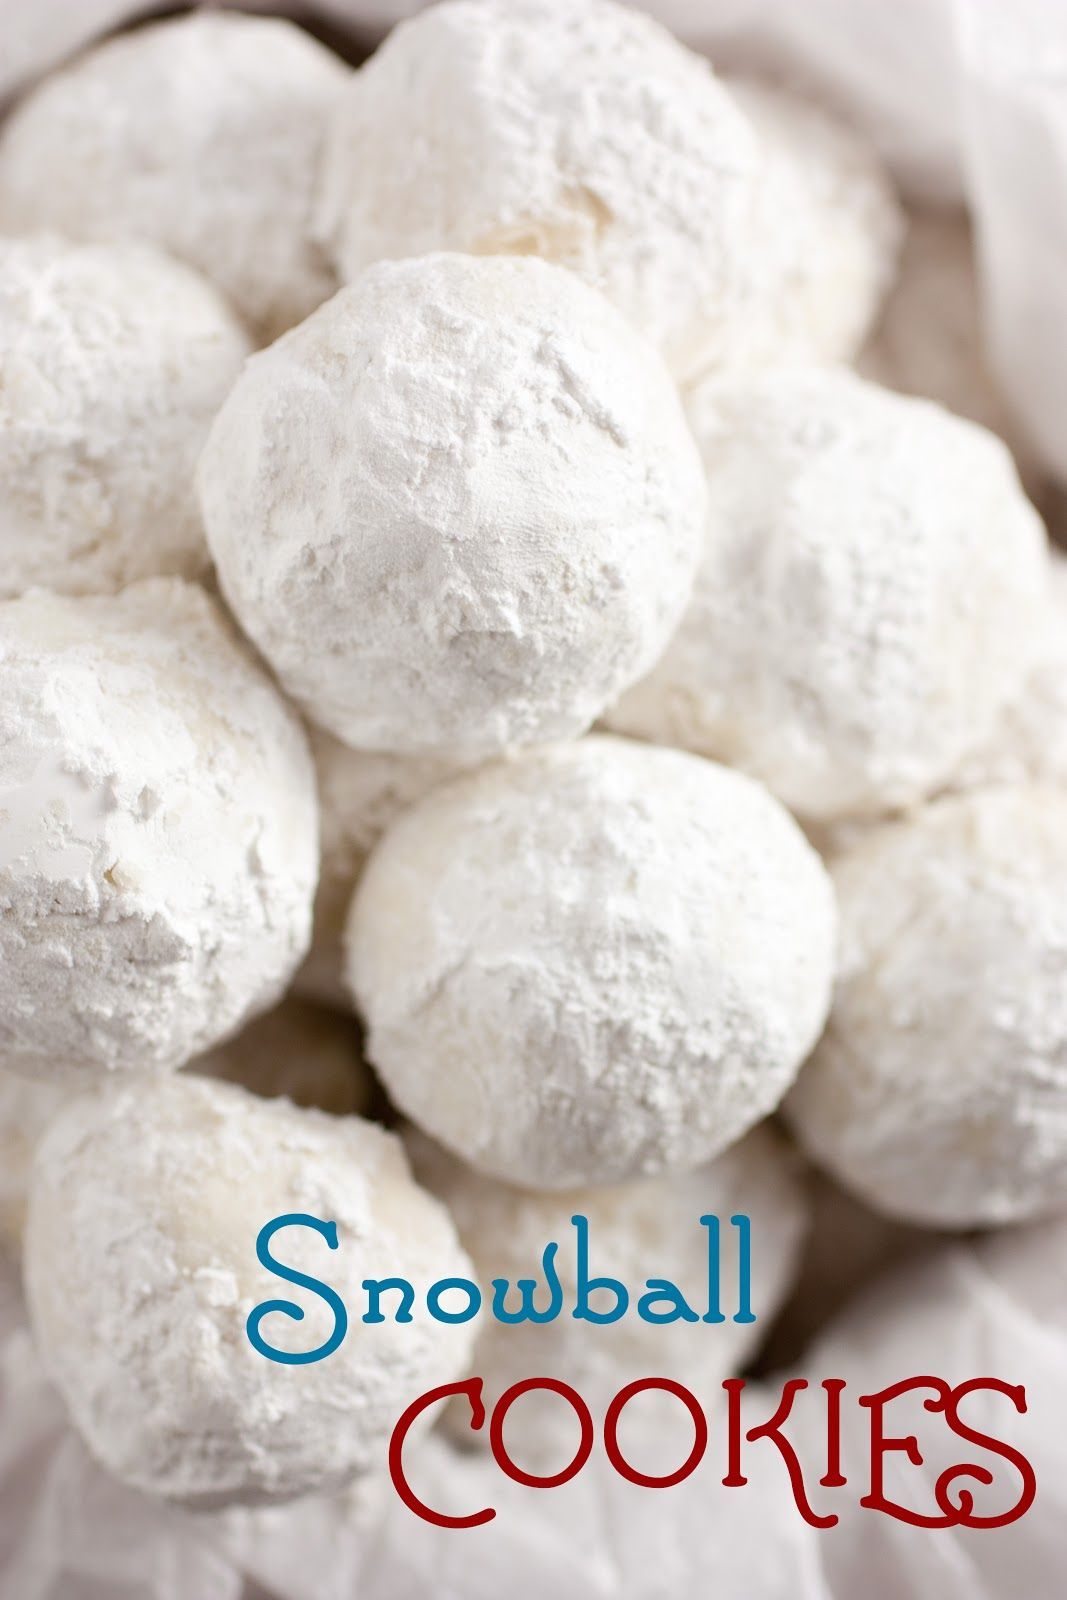 Snowball Cookies – perfect for winter and Christmas. These cookies melt your mouth!!